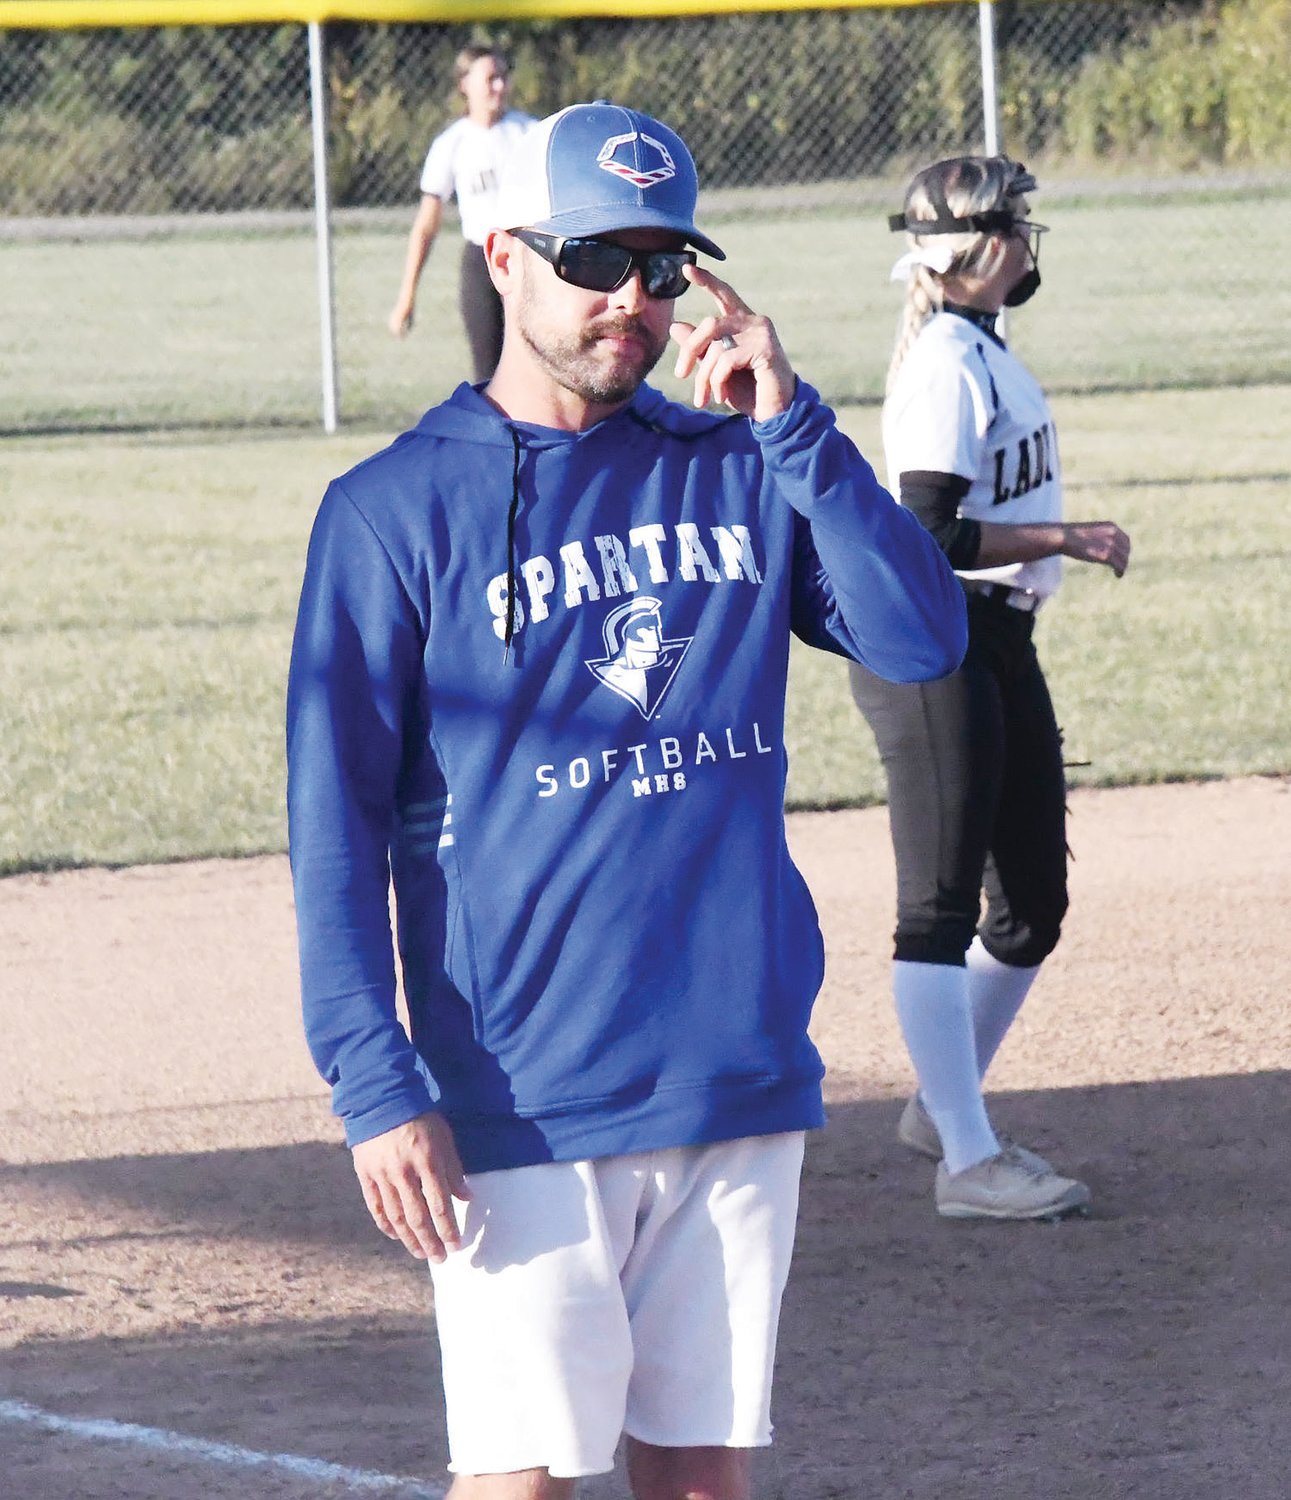 Moberly High School softball coach Drew Hunt, here giving a sign during a game versus Cairo from Sept. 27, credited the Spartan girls for never quitting on the season. They are now at the .500 mark after starting the campaign 2-9.